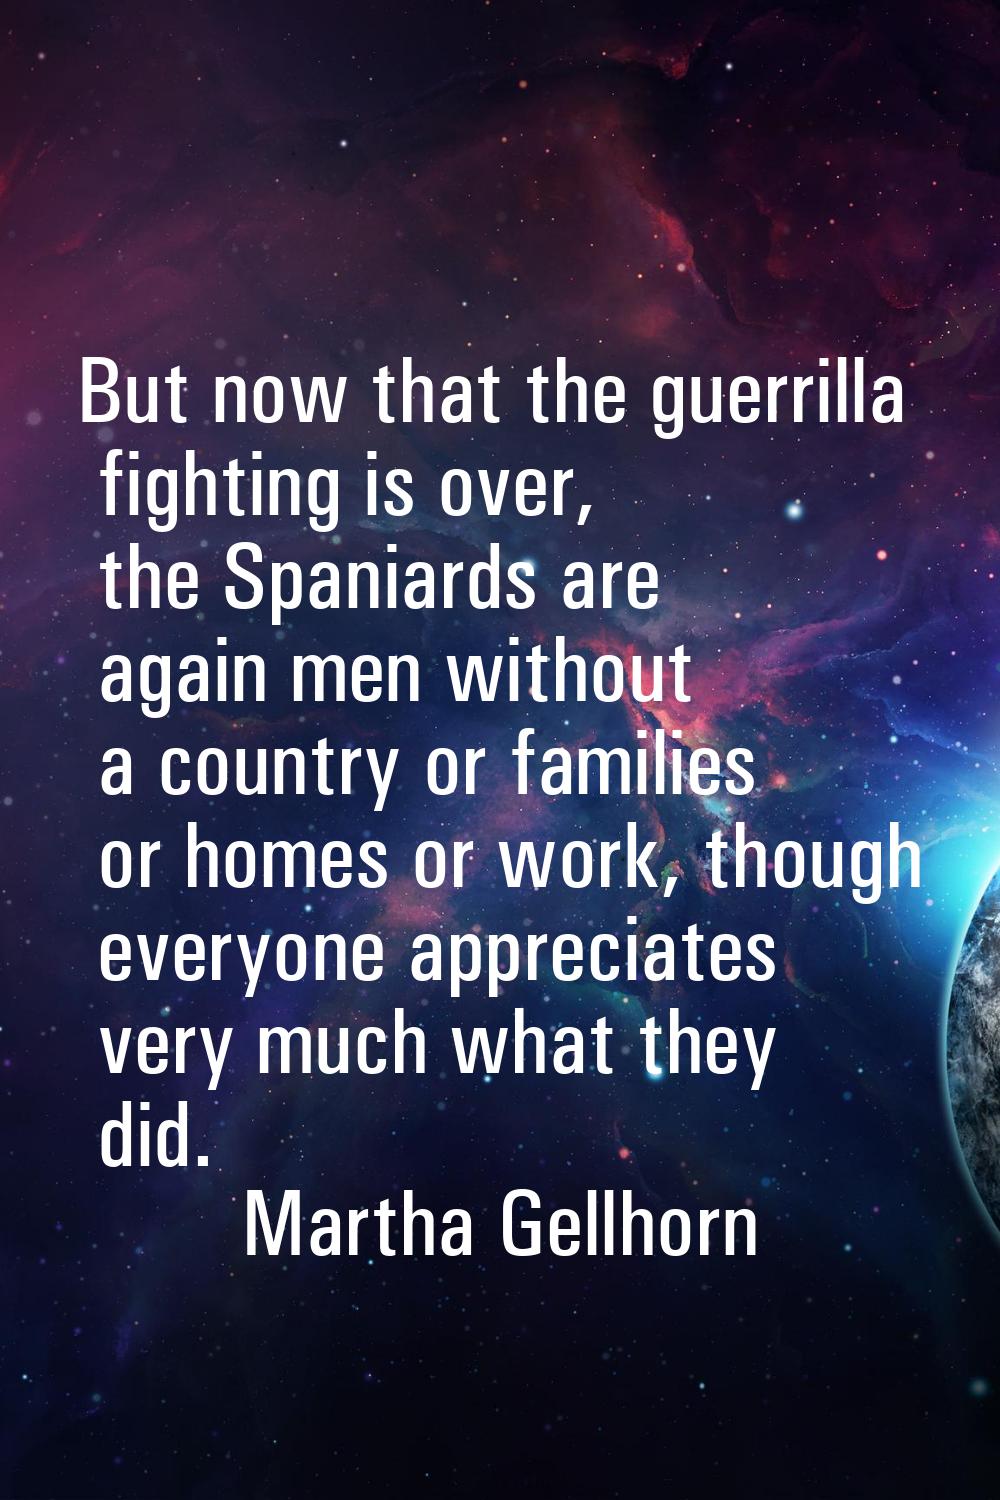 But now that the guerrilla fighting is over, the Spaniards are again men without a country or famil